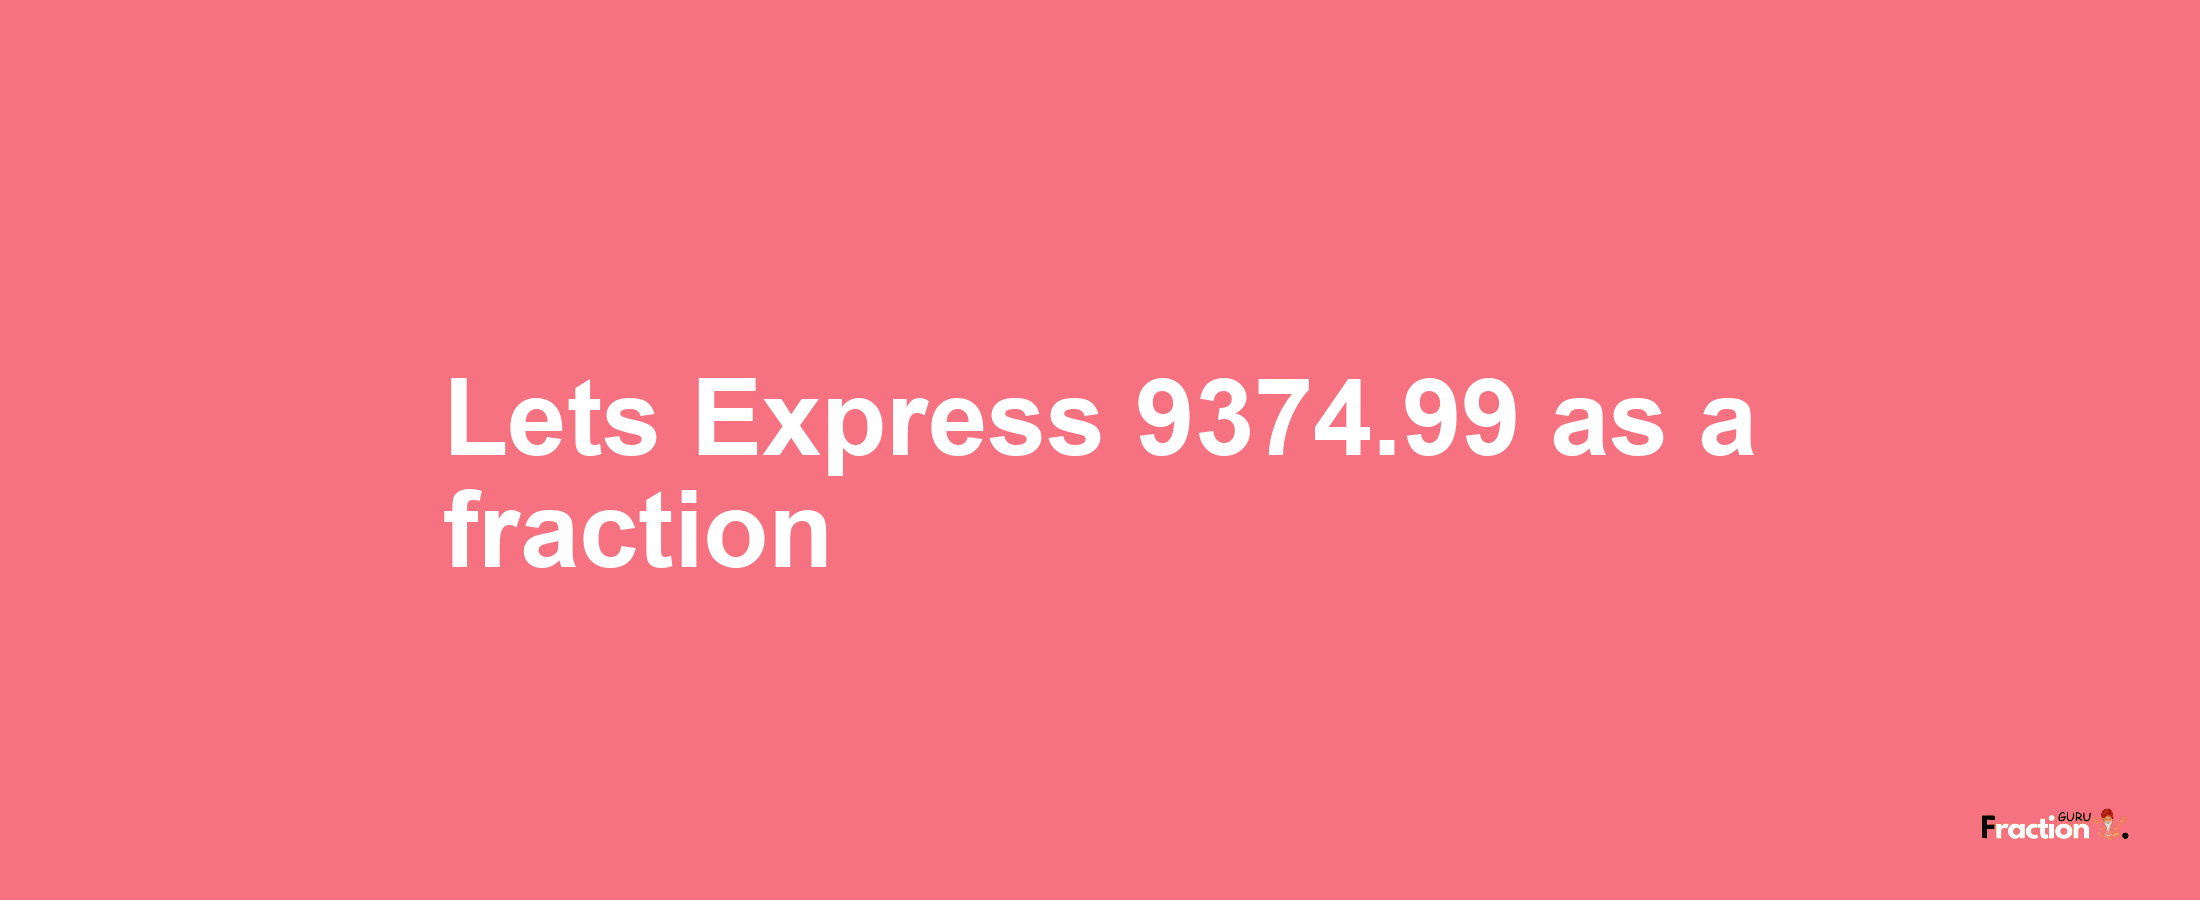 Lets Express 9374.99 as afraction